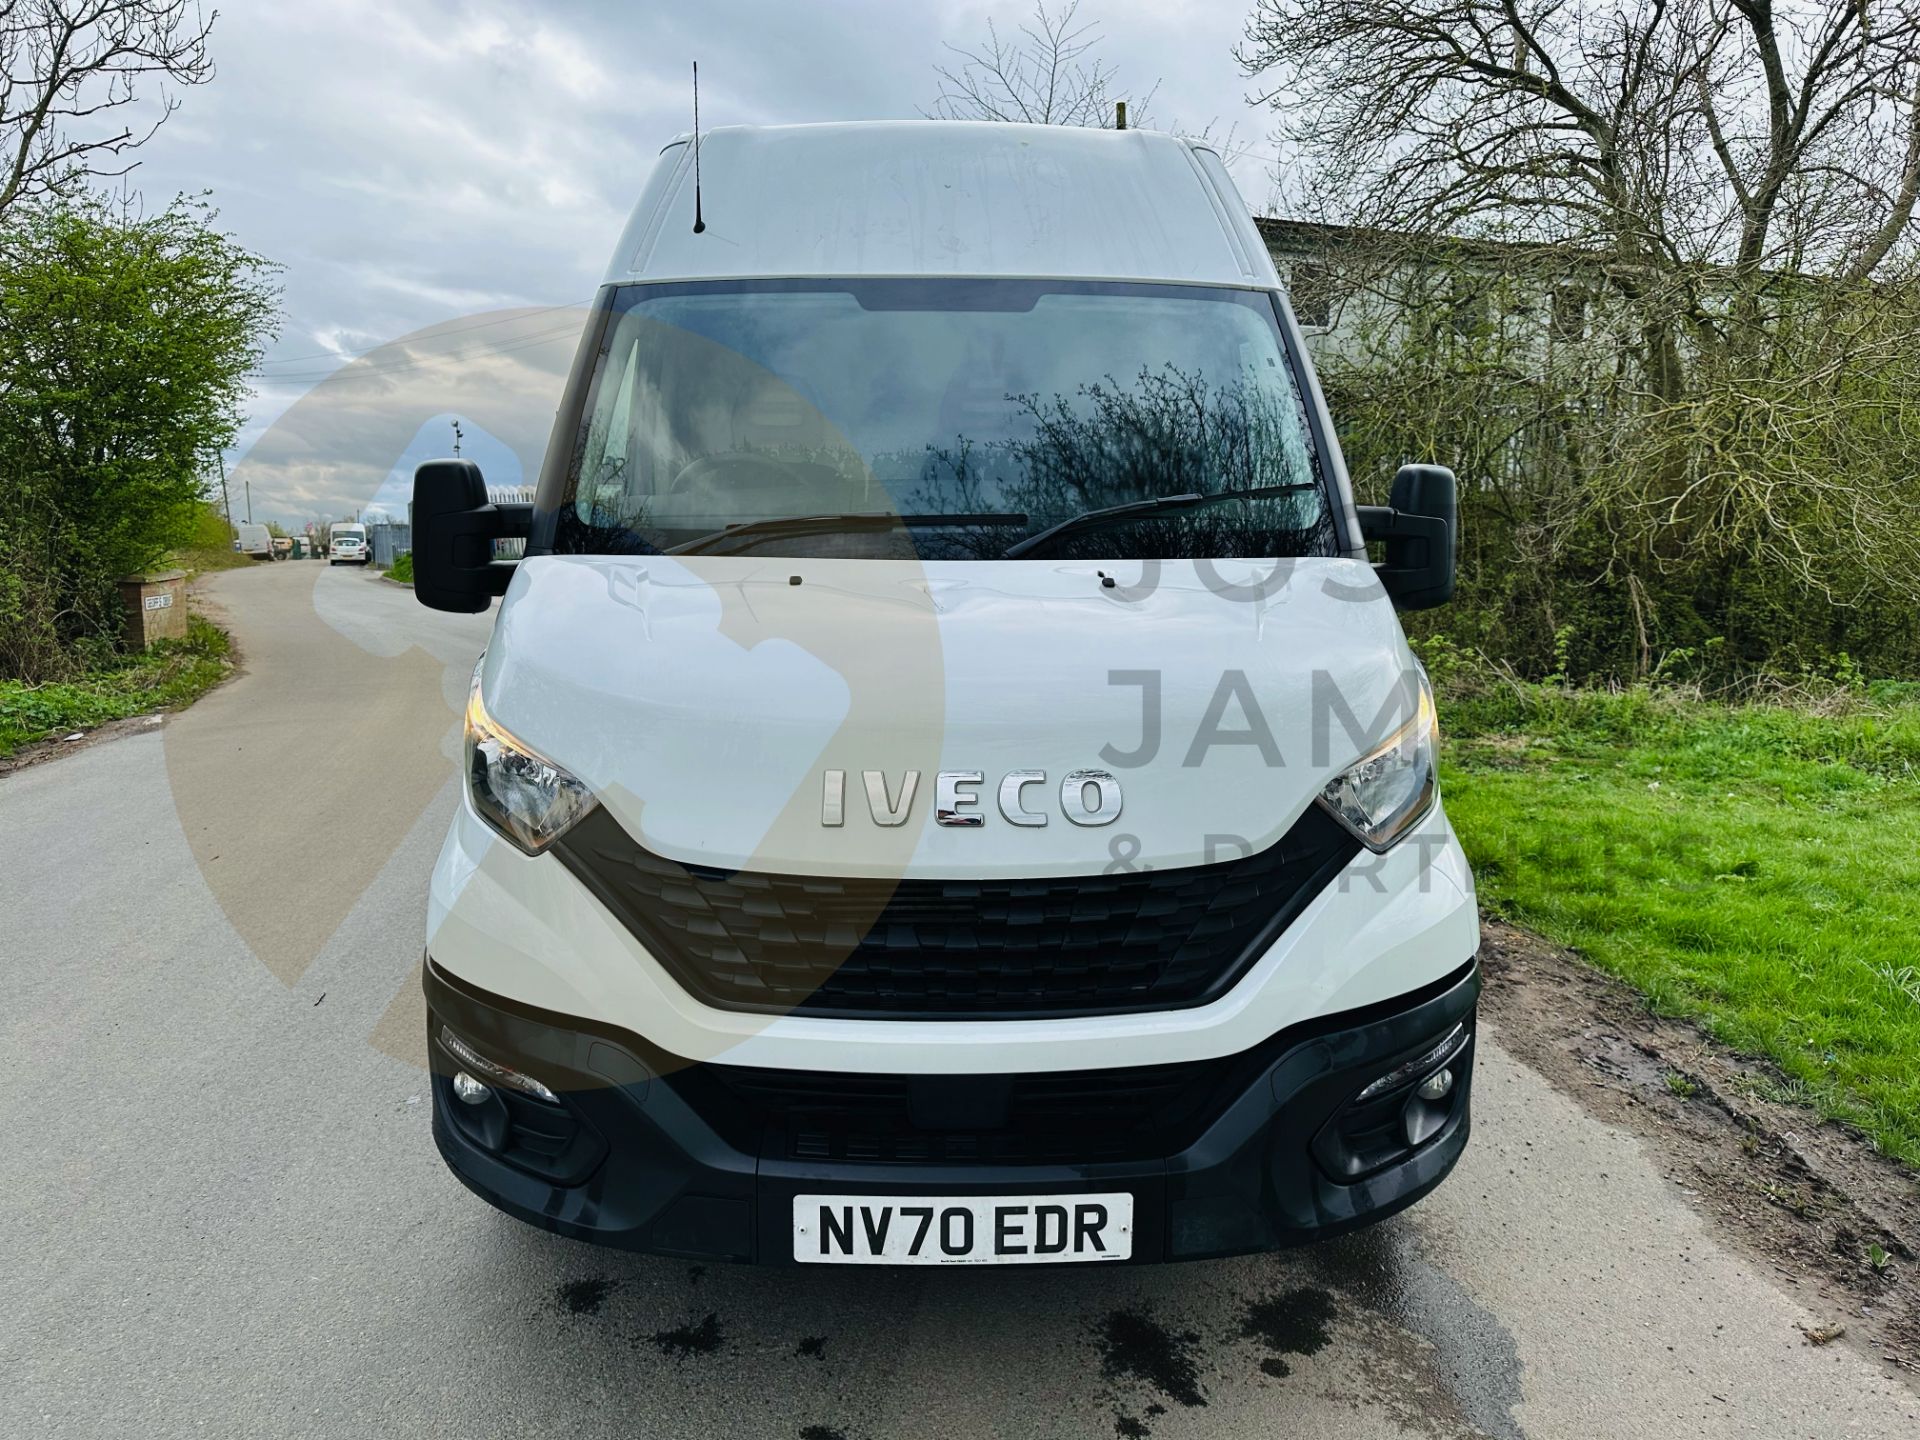 IVECO DAILY 35-140 LONG WHEEL BASE HIFG ROOF - 2021 REG (NEW SHAPE) ONLY 85K MILES - AIR CON - LOOK! - Image 3 of 30